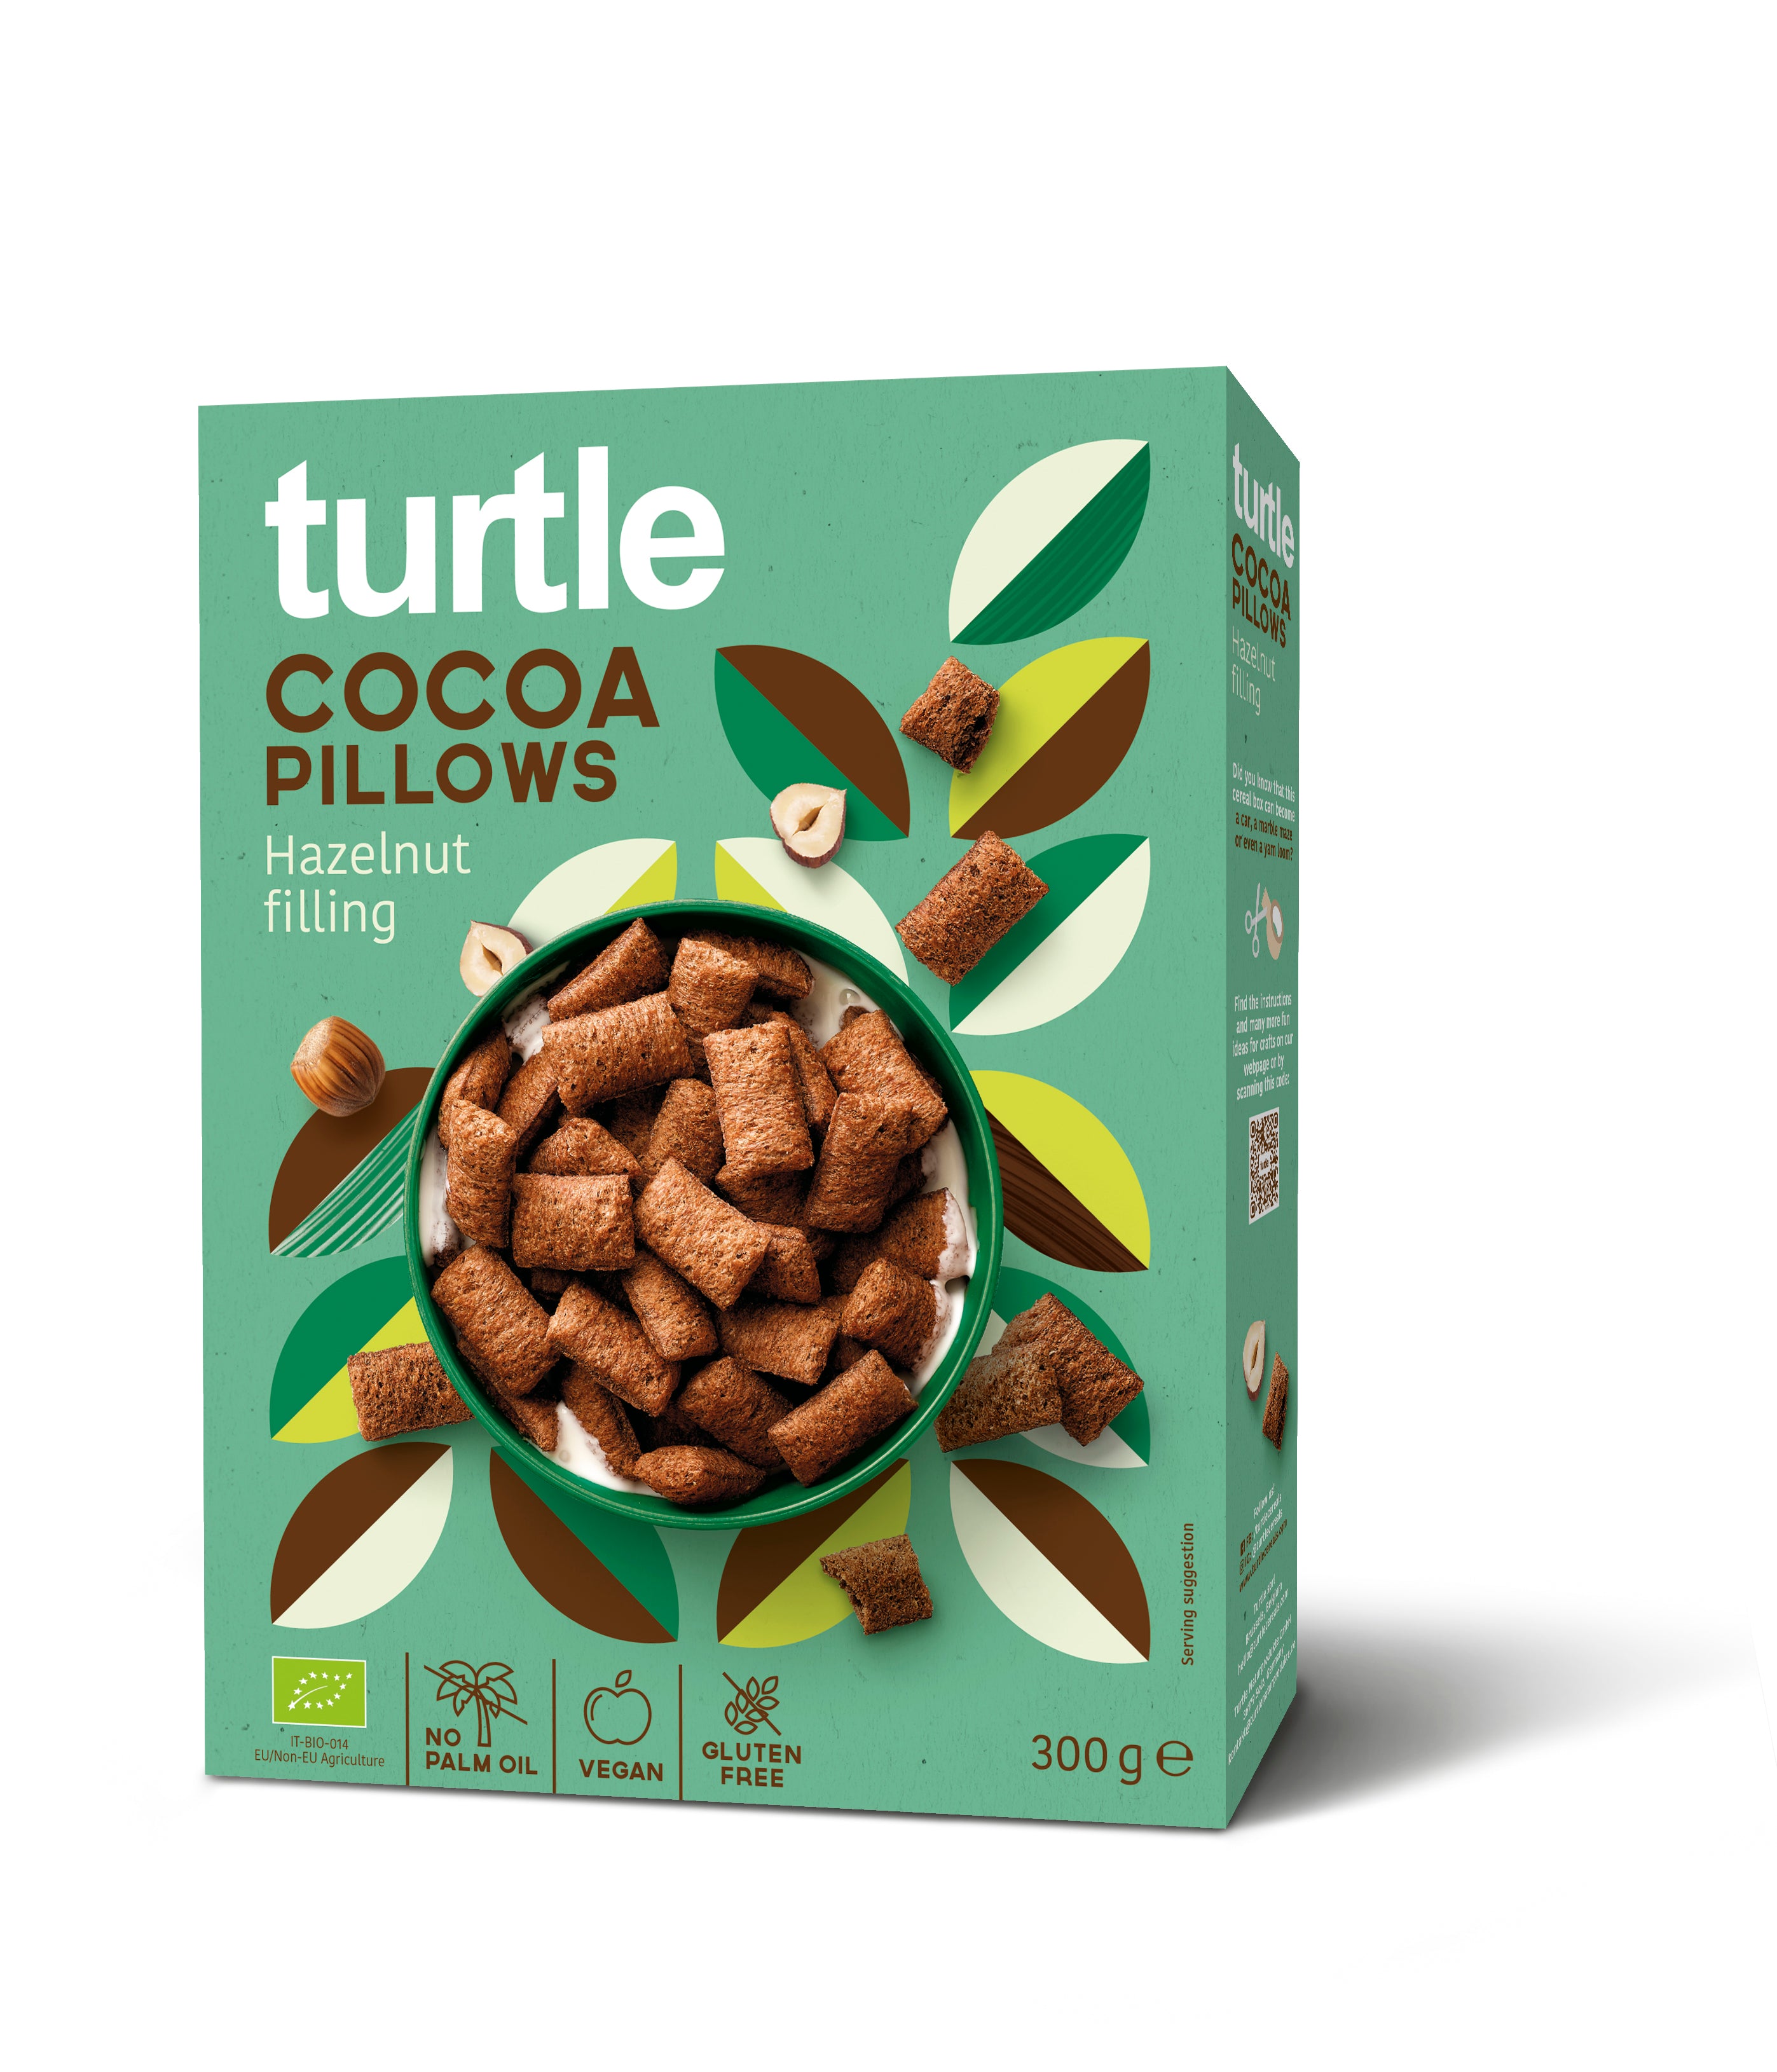 Cocoa Pillows with Hazelnut filling  - Organic and Gluten-Free